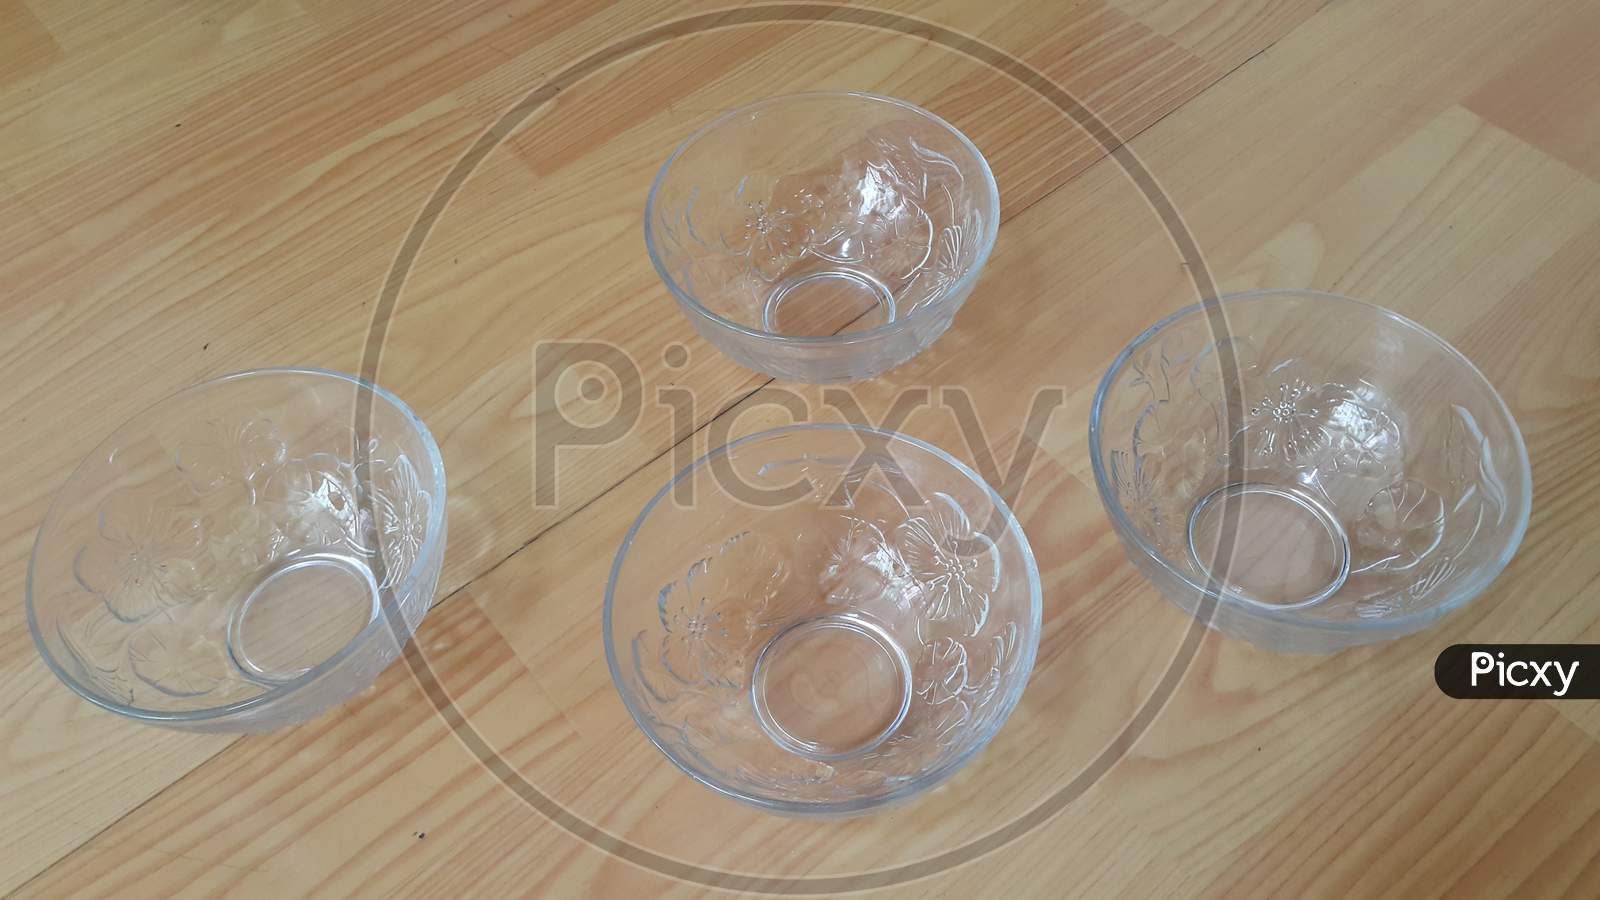 Top View Of Empty White Glass Bowls On A Wooden Floor